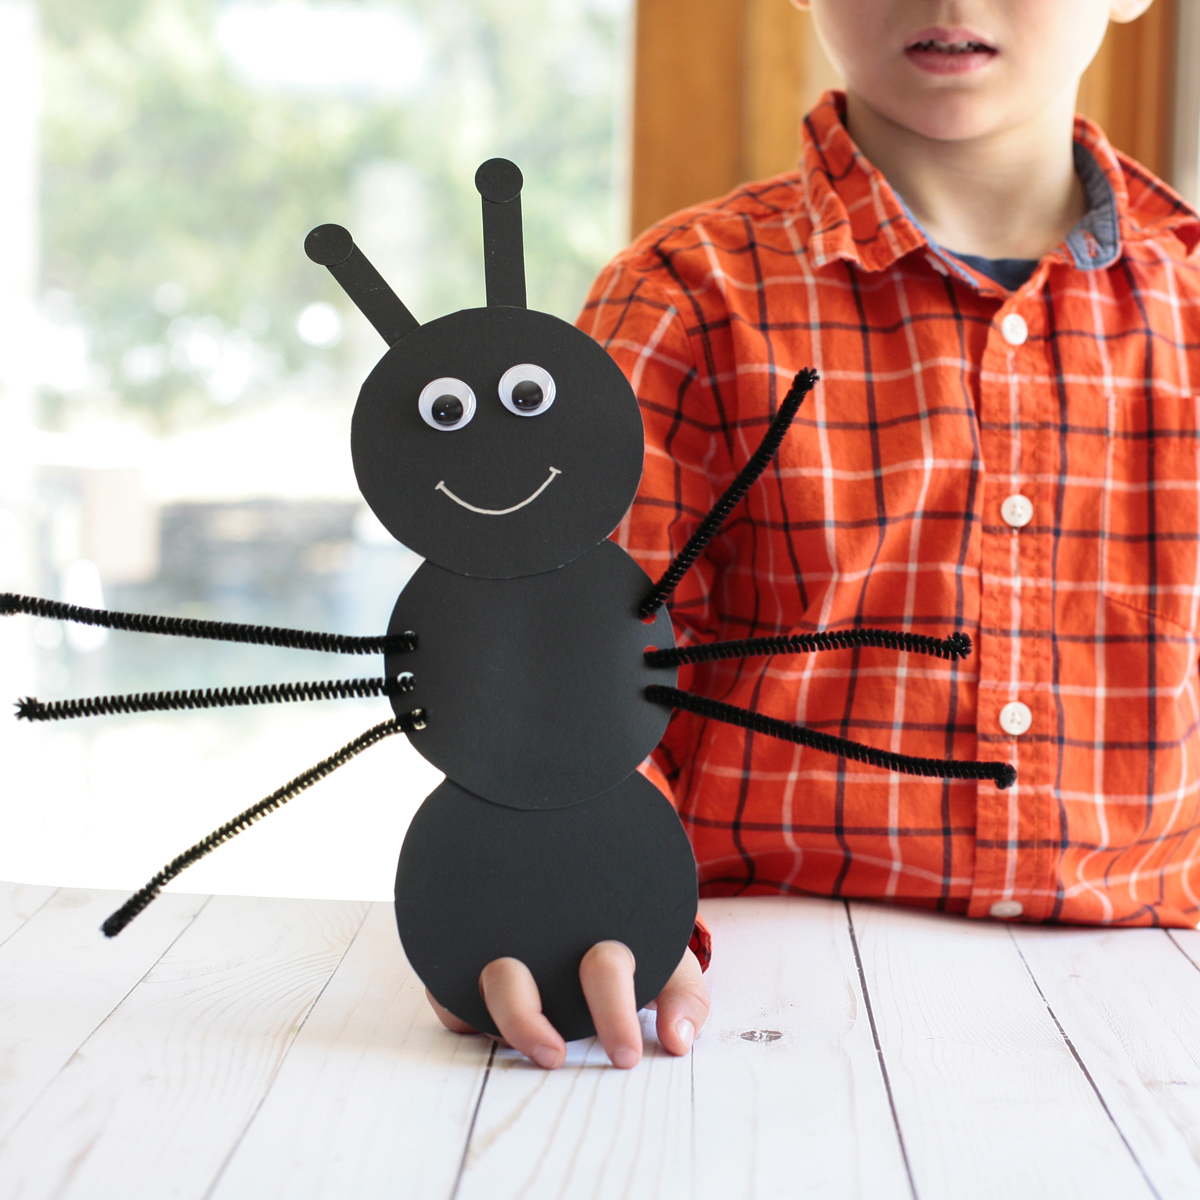 Ant Finger Puppets - Super Simple1200 x 1200